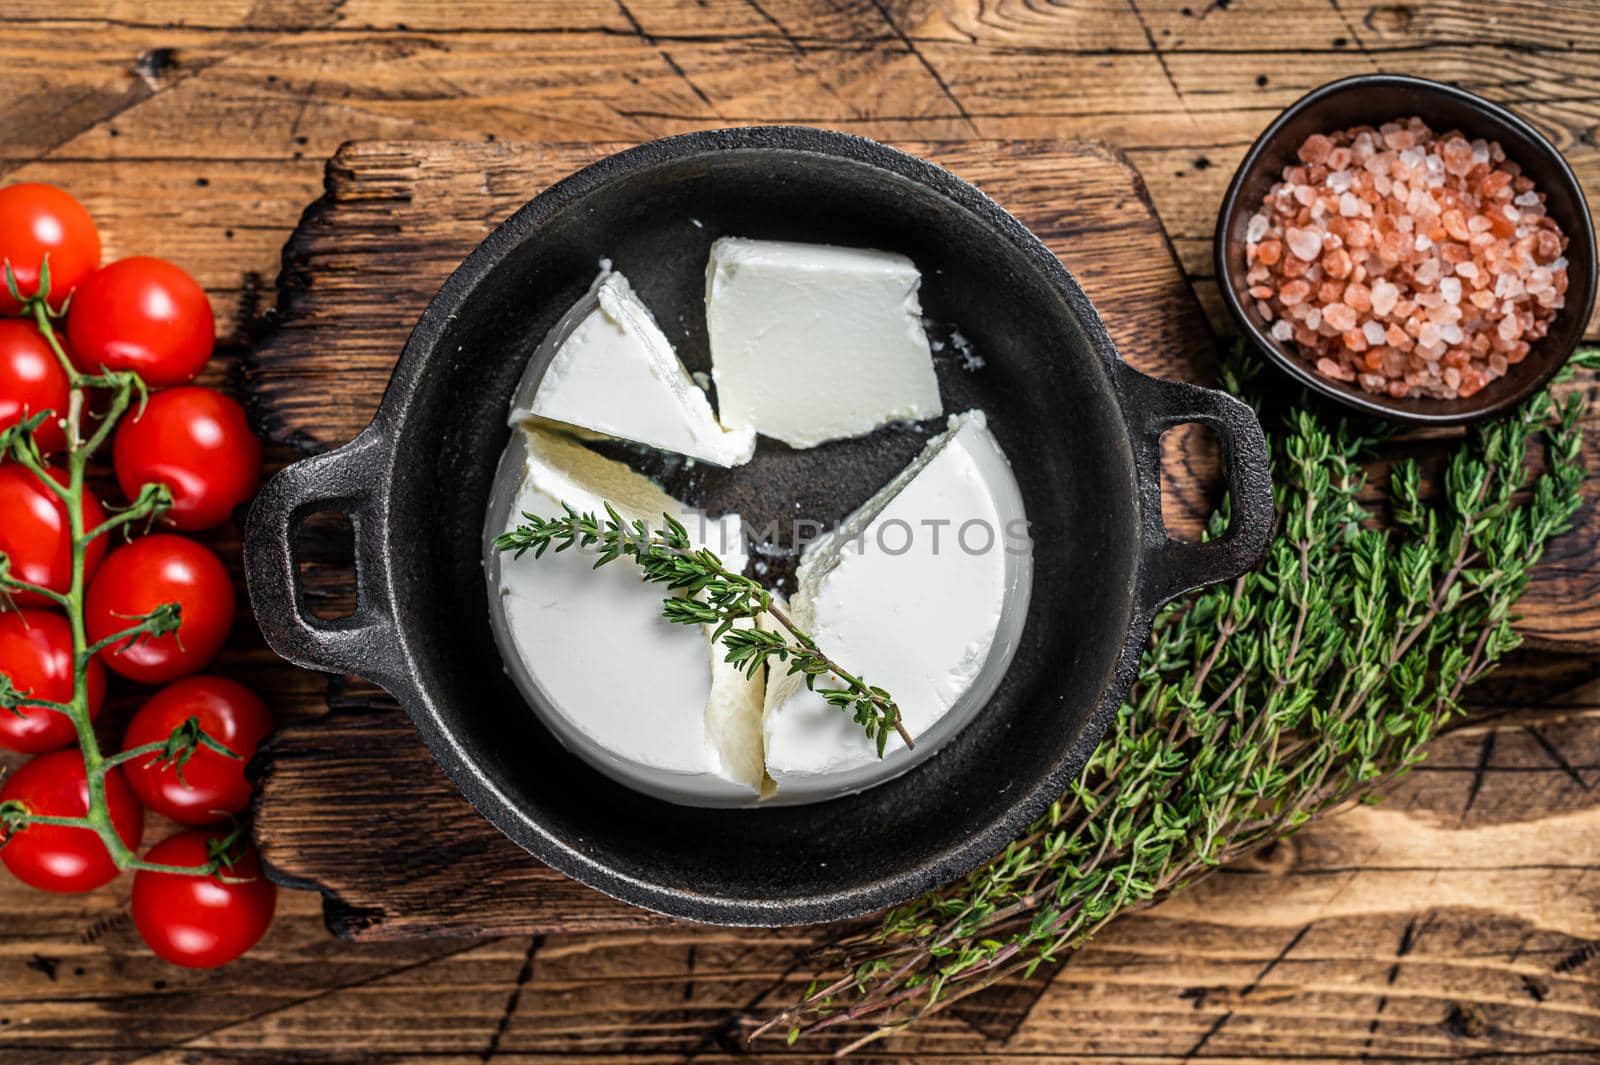 Fresh Ricotta cream Cheese in a pan with basil and tomato. wooden background. Top view by Composter